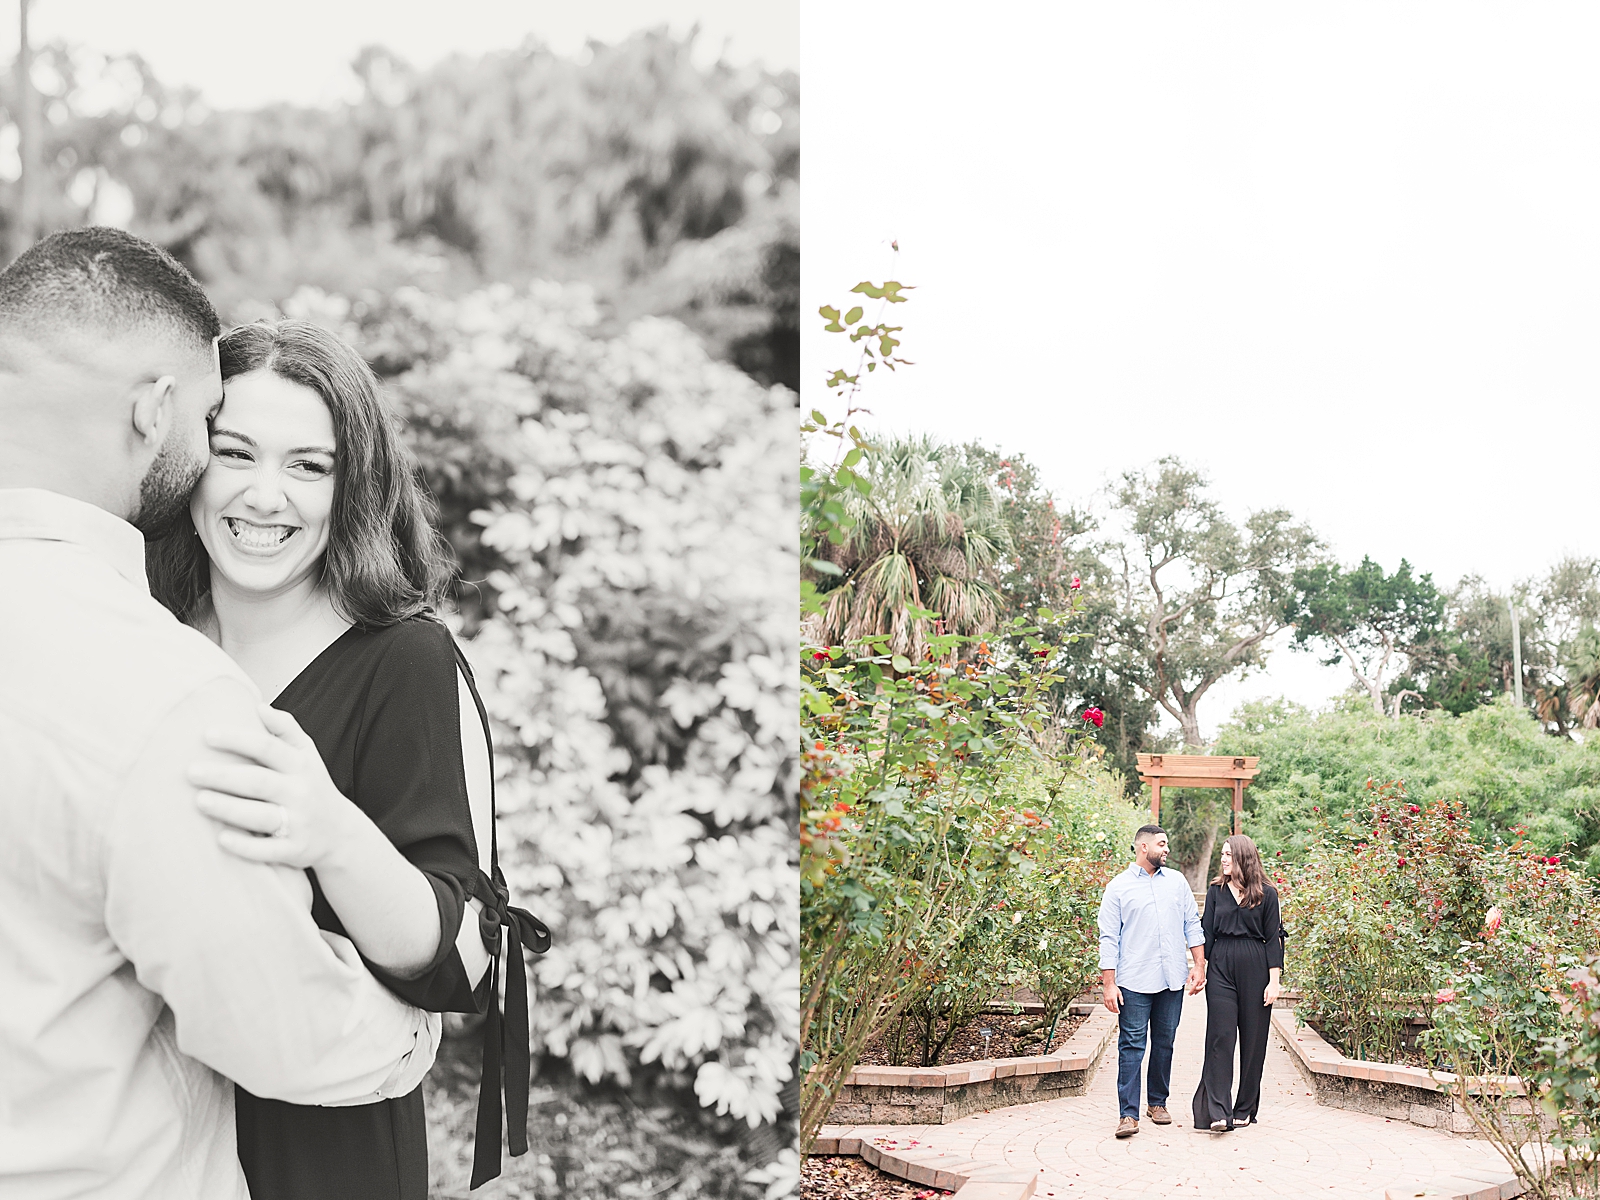 St. Augustine Engagement Black and White Chloe smiling over Nick's Shoulder and Couple walking holding hands in Rose Garden Photos